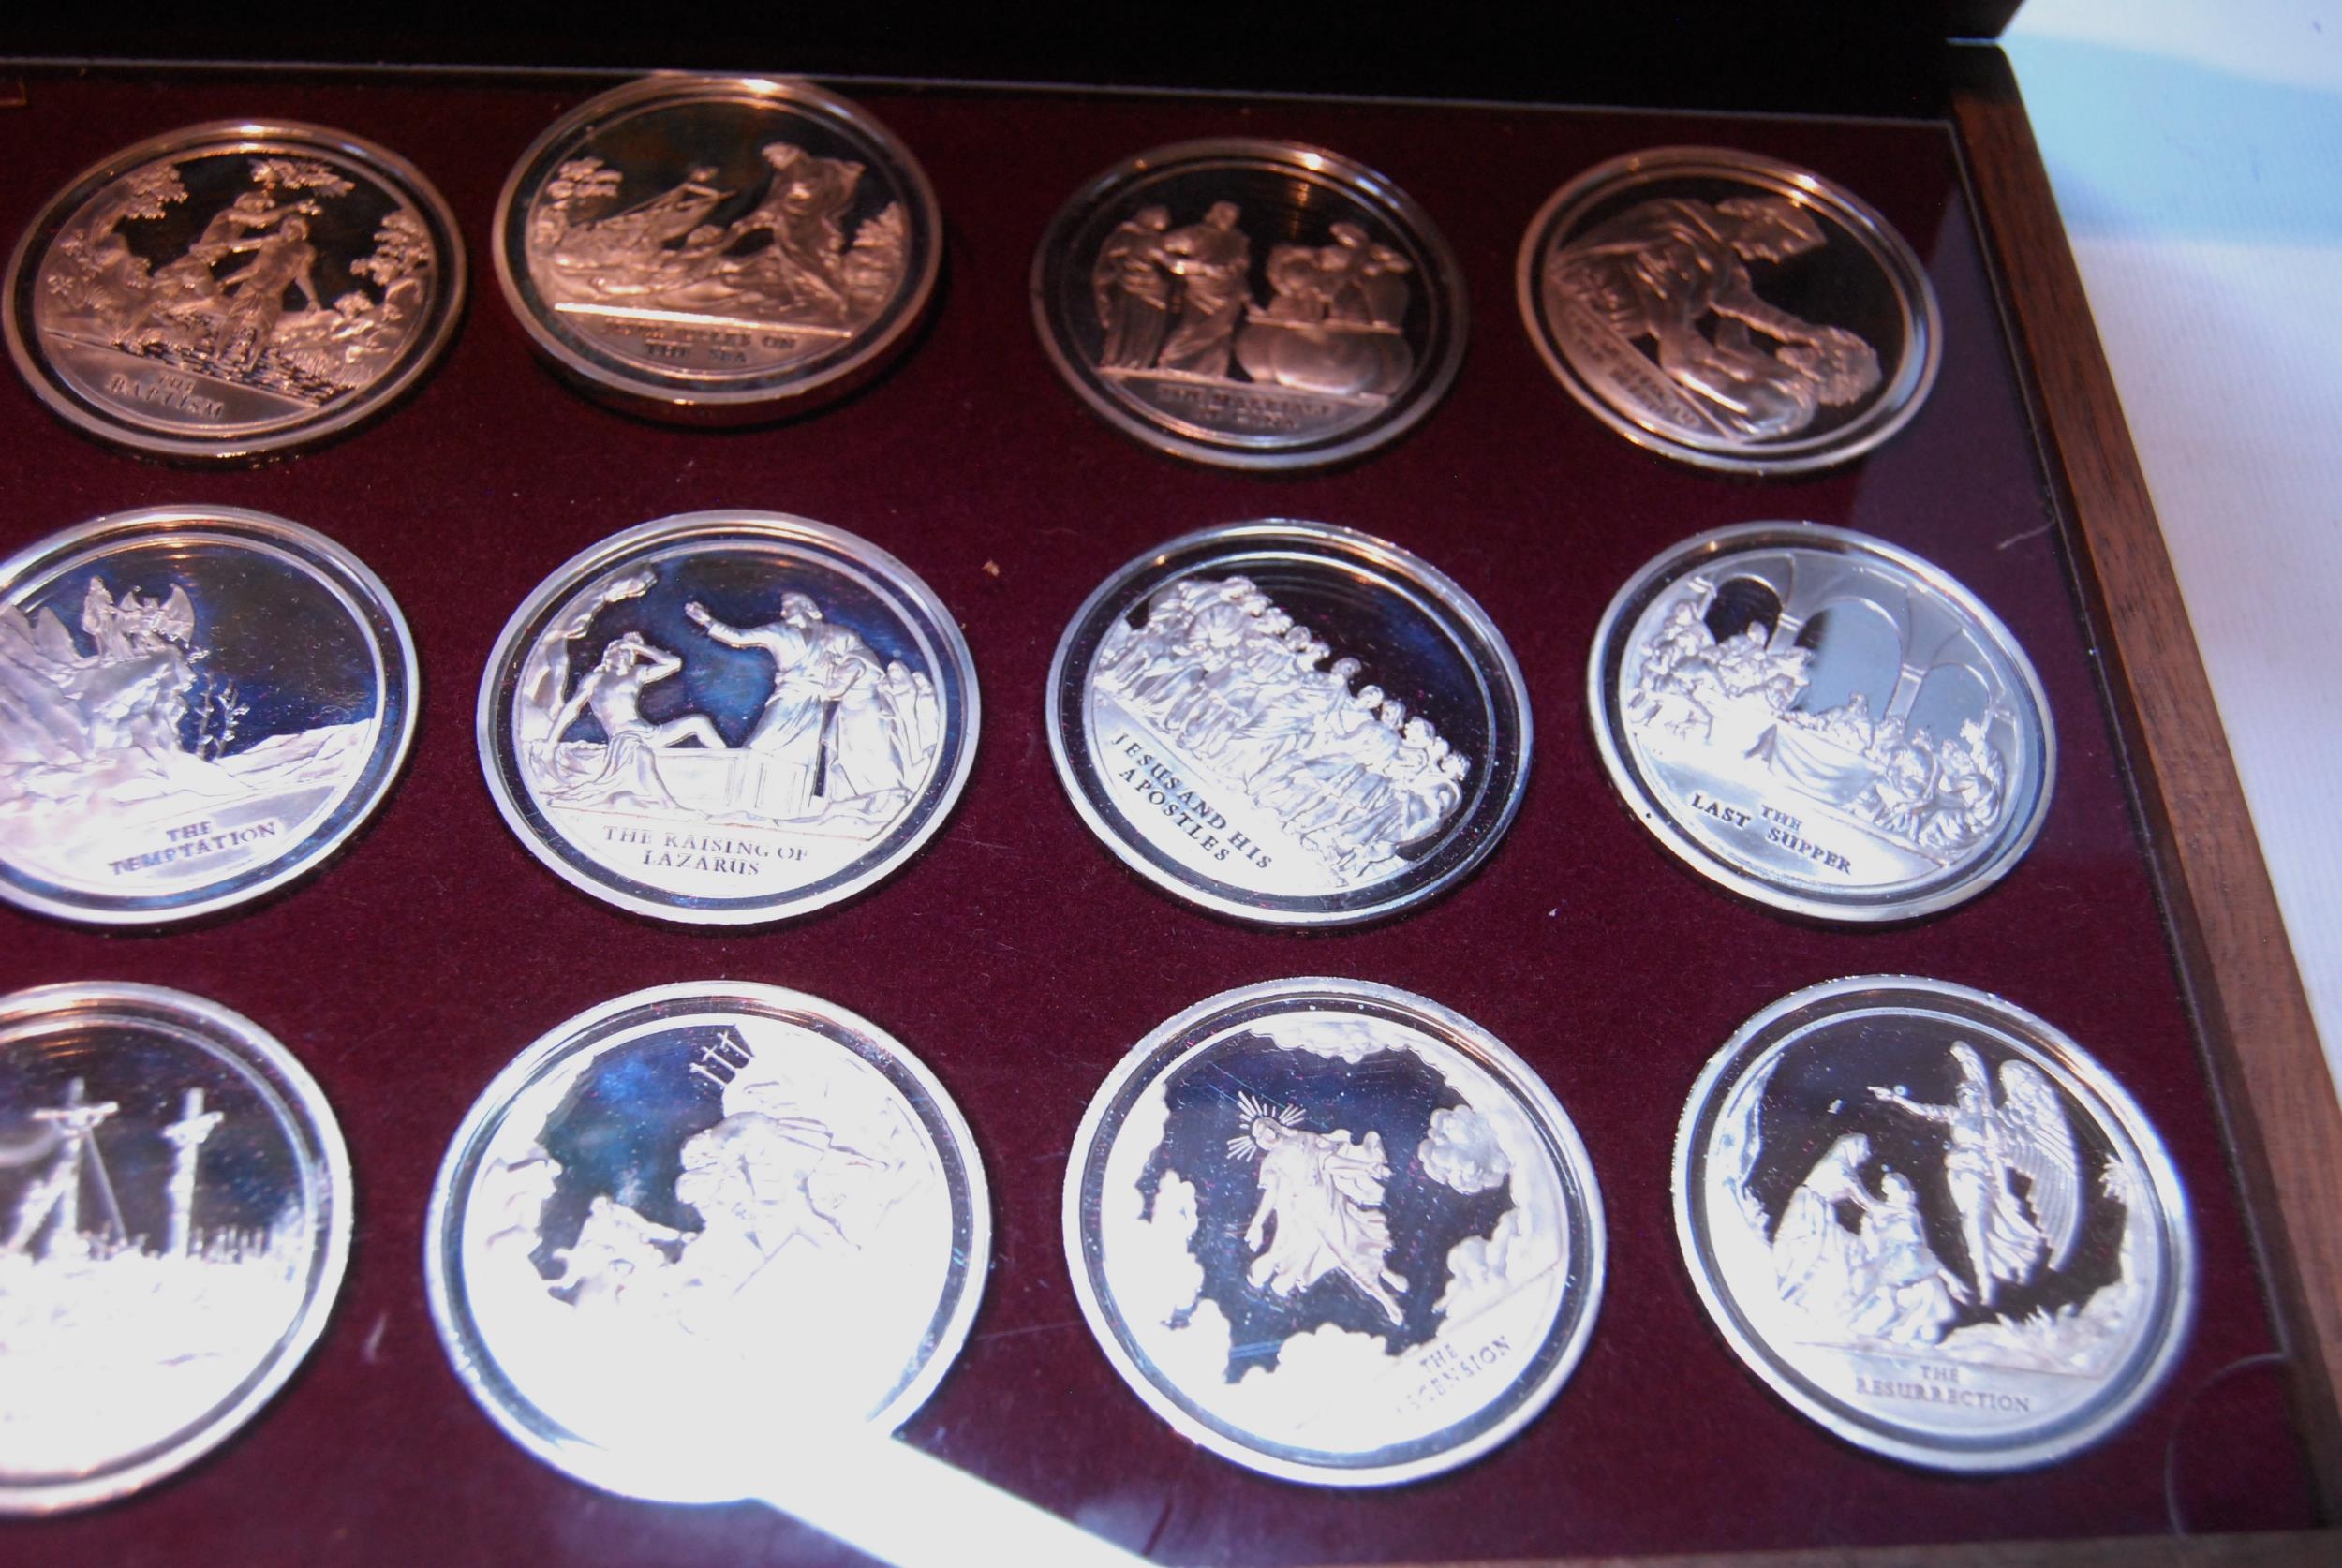 Set of twenty-four Danbury Mint silver medallions, 'The Life of Jesus', each 50g, 1974, with case - Image 4 of 5